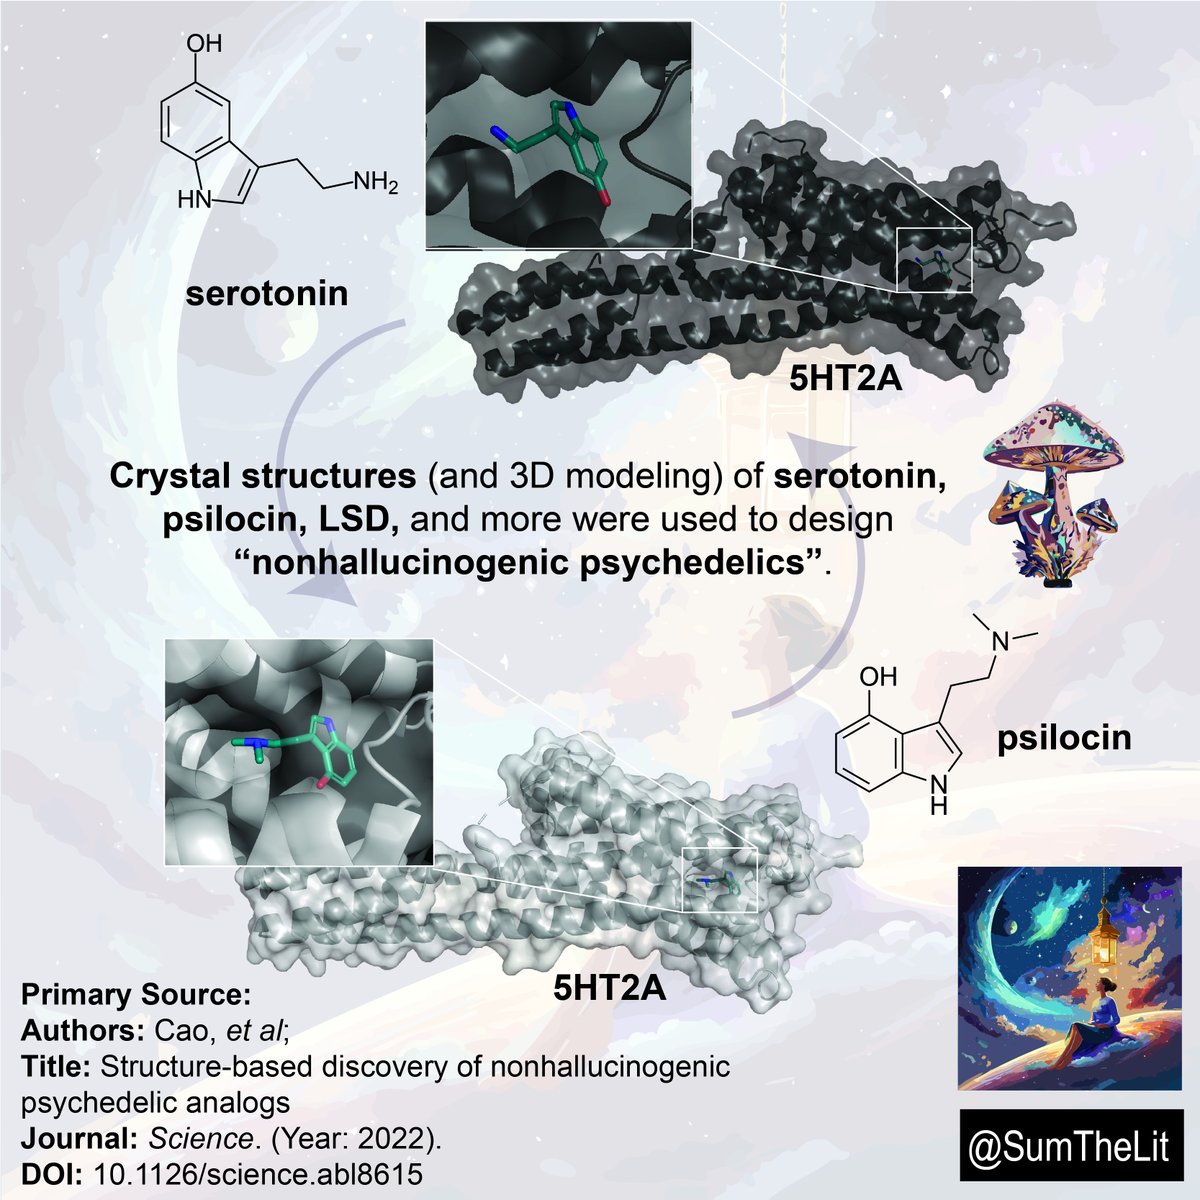 How can researchers use the crystal structures of psilocin and serotonin (bound to ther biological target 5HT2A) to design a nonhallucinogenic psychedelic? 🩺🧪🍄🌿🥼

DOI: 10.1126/science.abl861

#psychedelics #medchem #sumthelit #LSD #psilocin #psilocybin #nonhallucinogenic